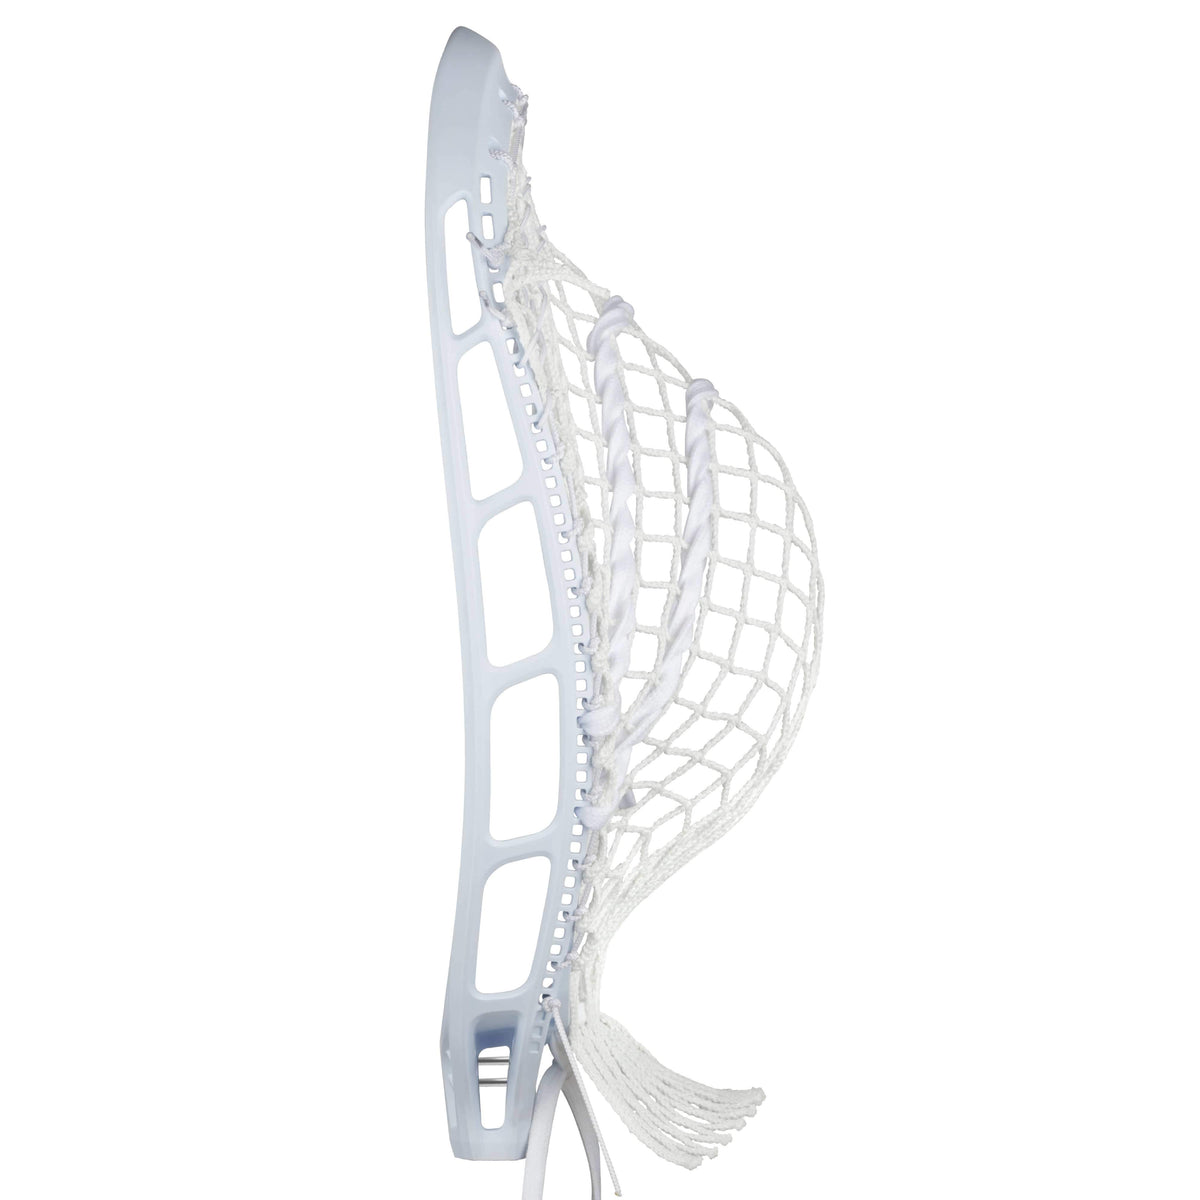 StringKing Mark 2G Goalie Strung Grizzly 2s Lacrosse Head